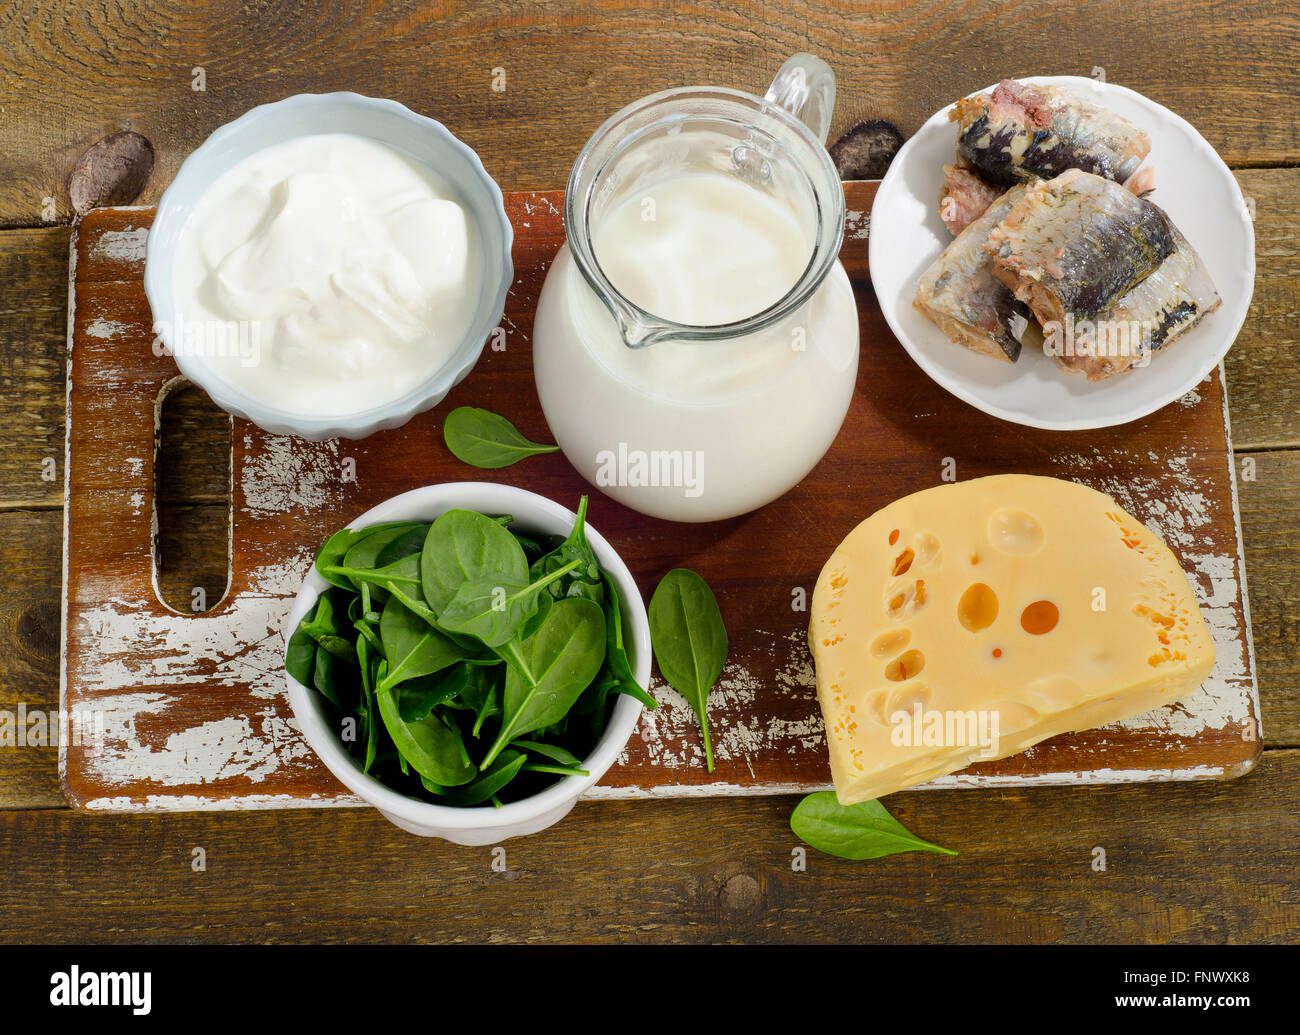 Food Sources of Calcium. View from above. Stock Photo